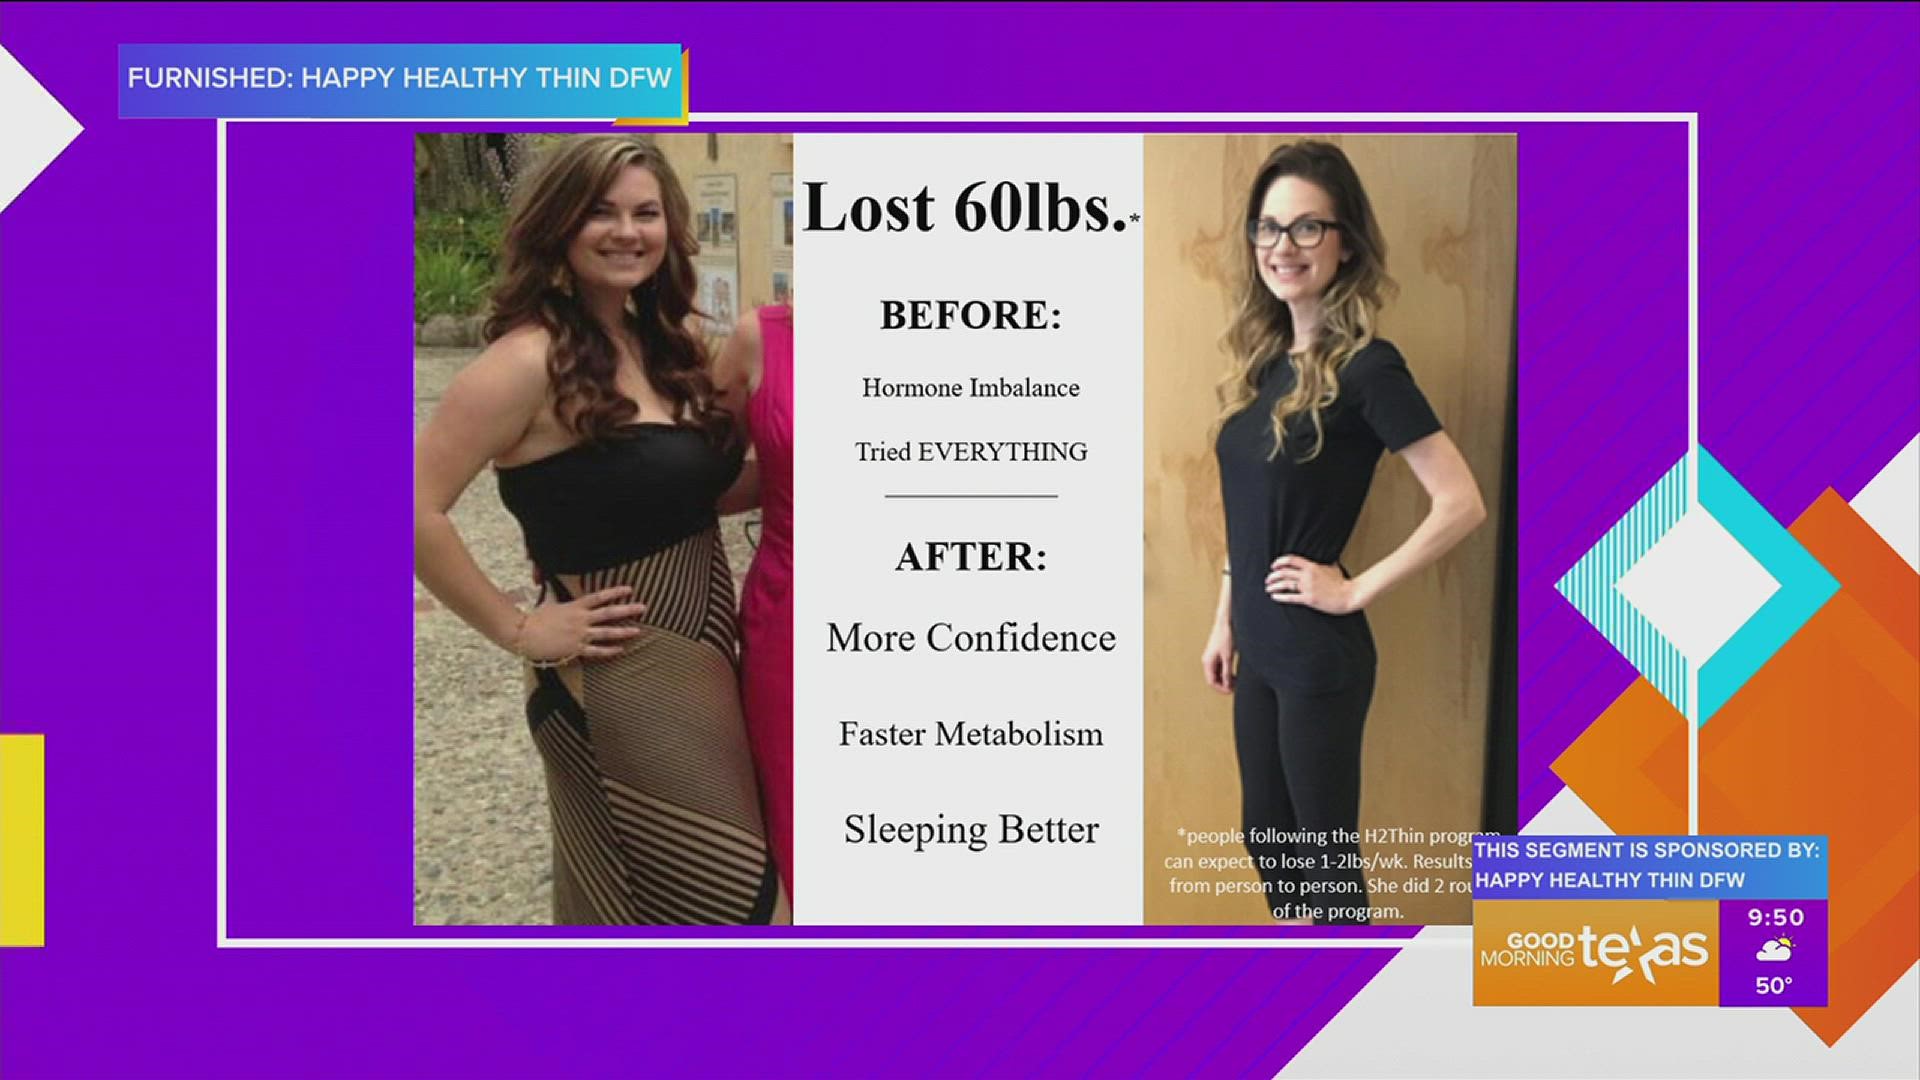 This segment is sponsored by: Happy Healthy Thin DFW